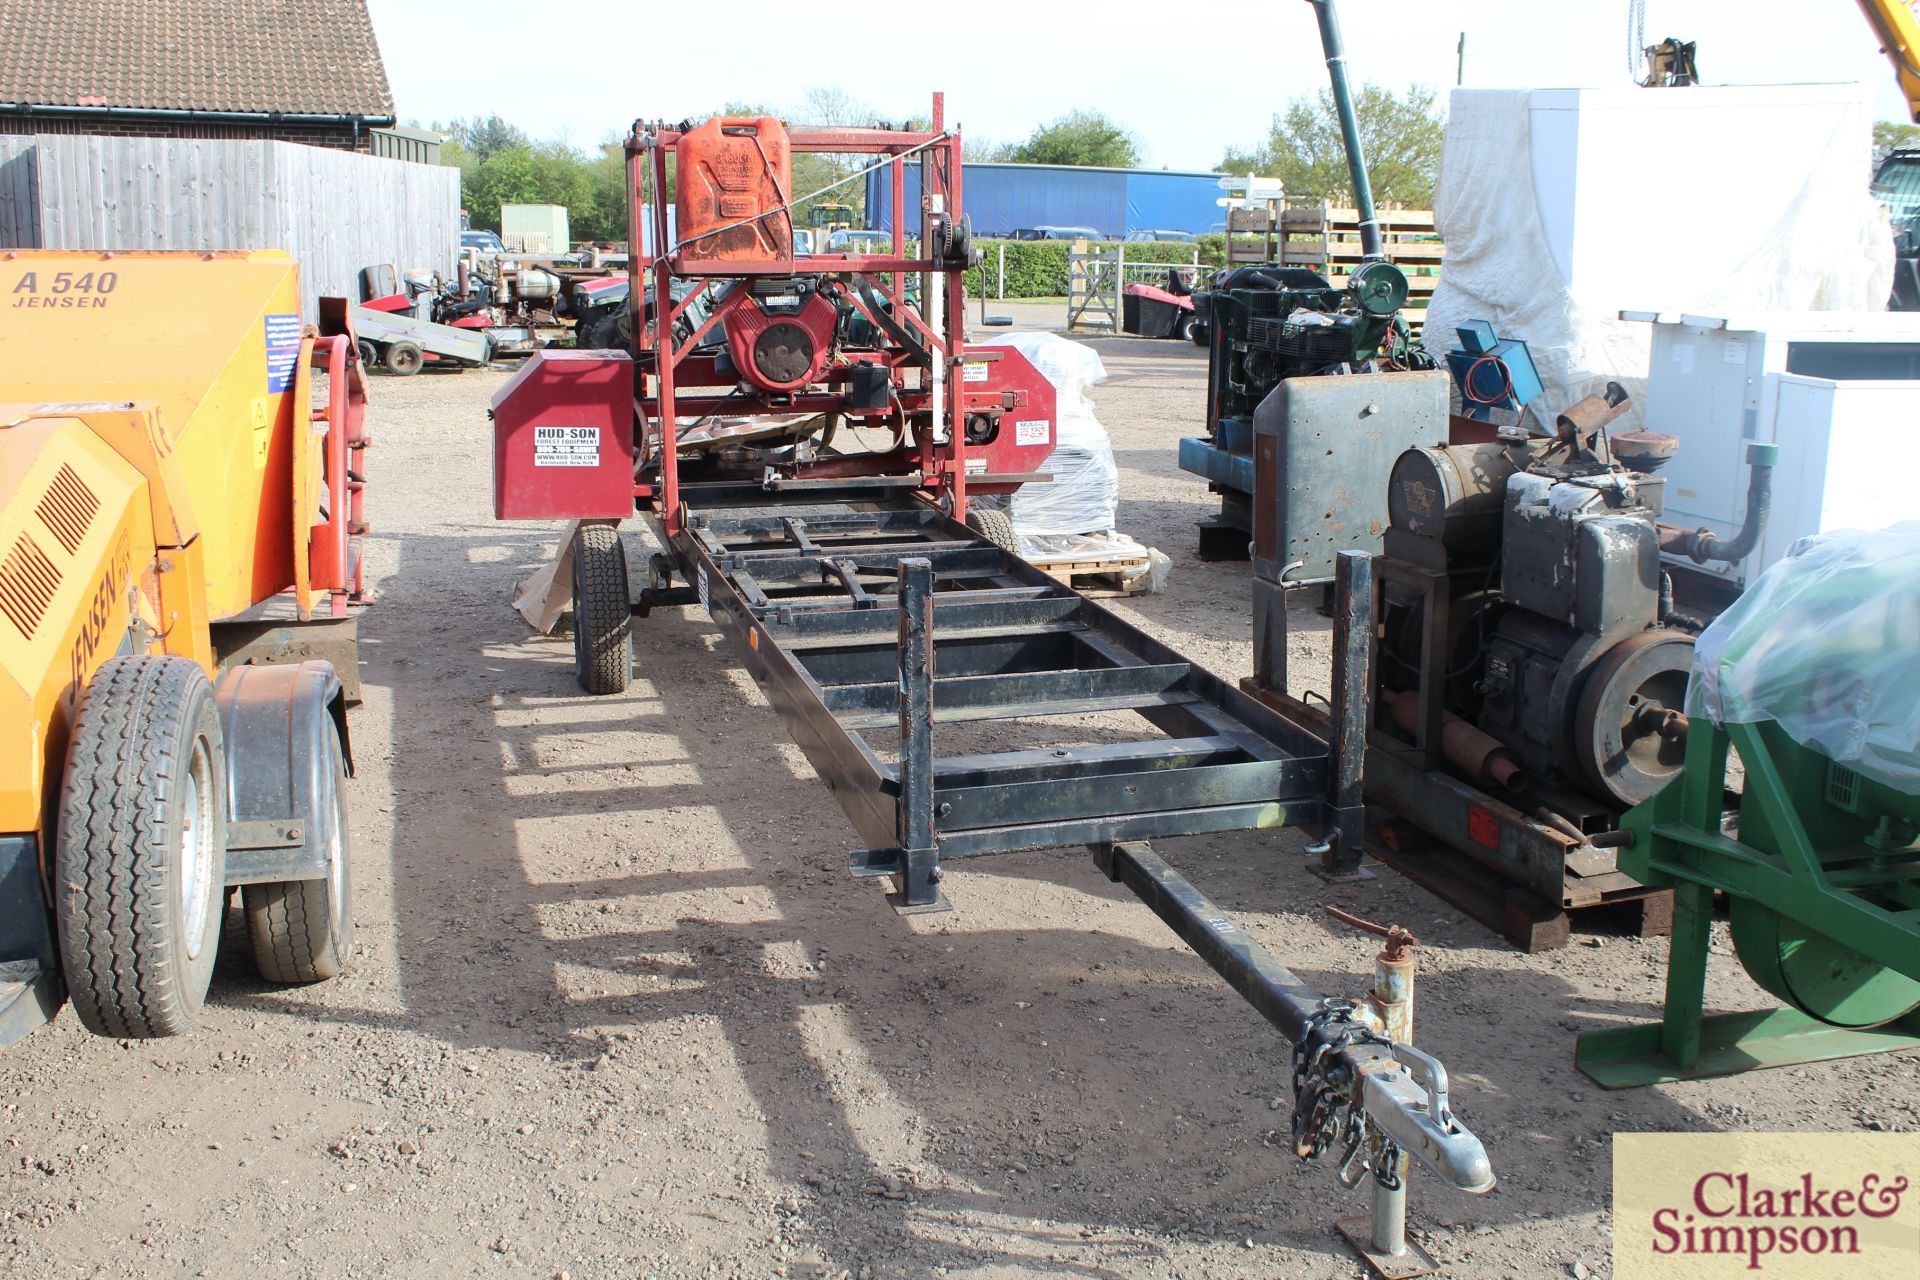 Hud-Son Oscar 30in portable trailer mounted saw mill. With Vanguard V-twin petrol engine.